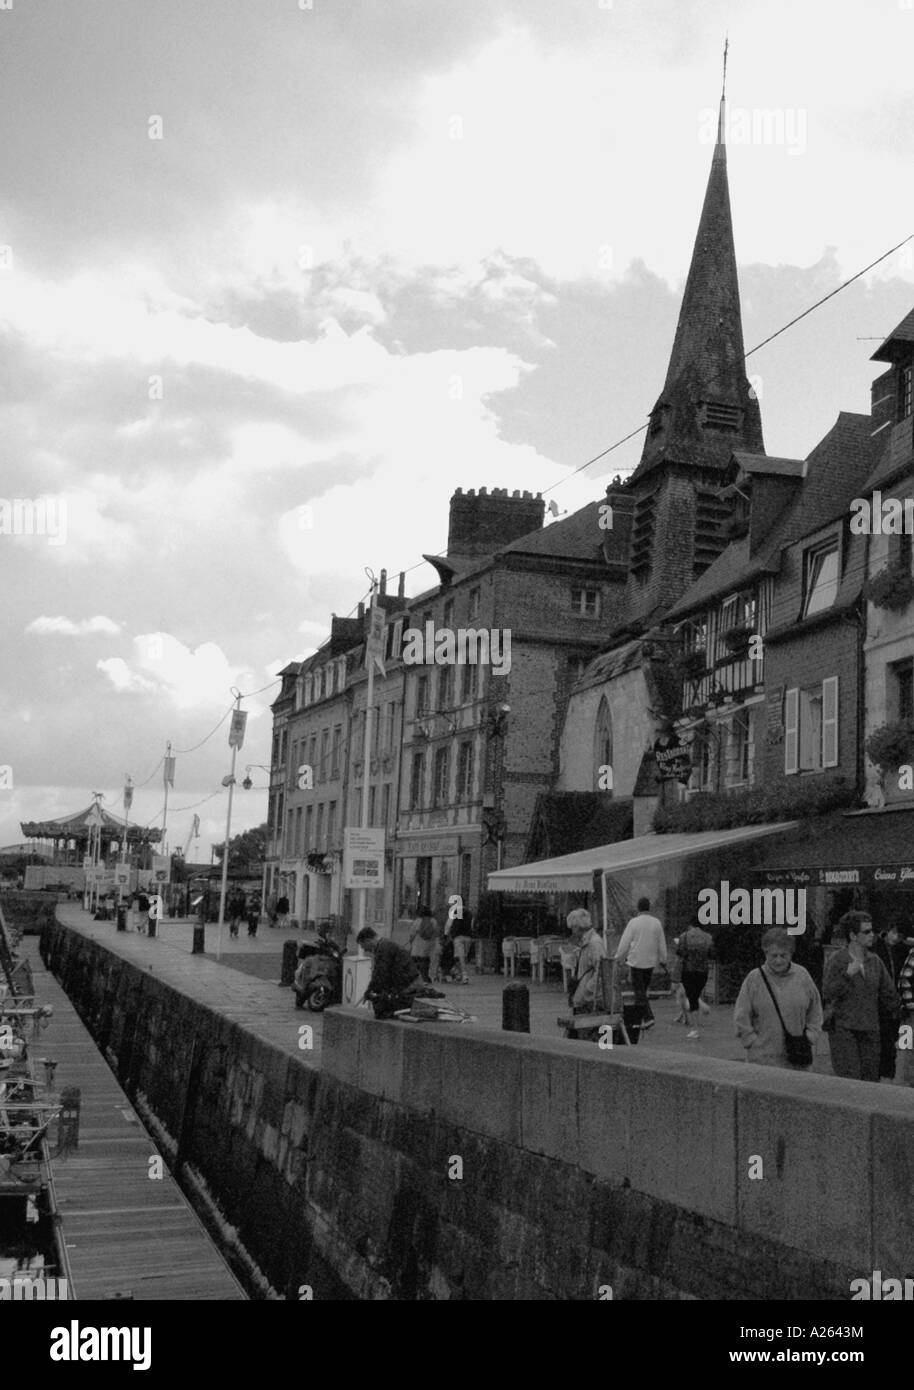 Characteristic View of Honfleur Old Port English Channel La Manche Normandy Normandie North Western France Europe Stock Photo